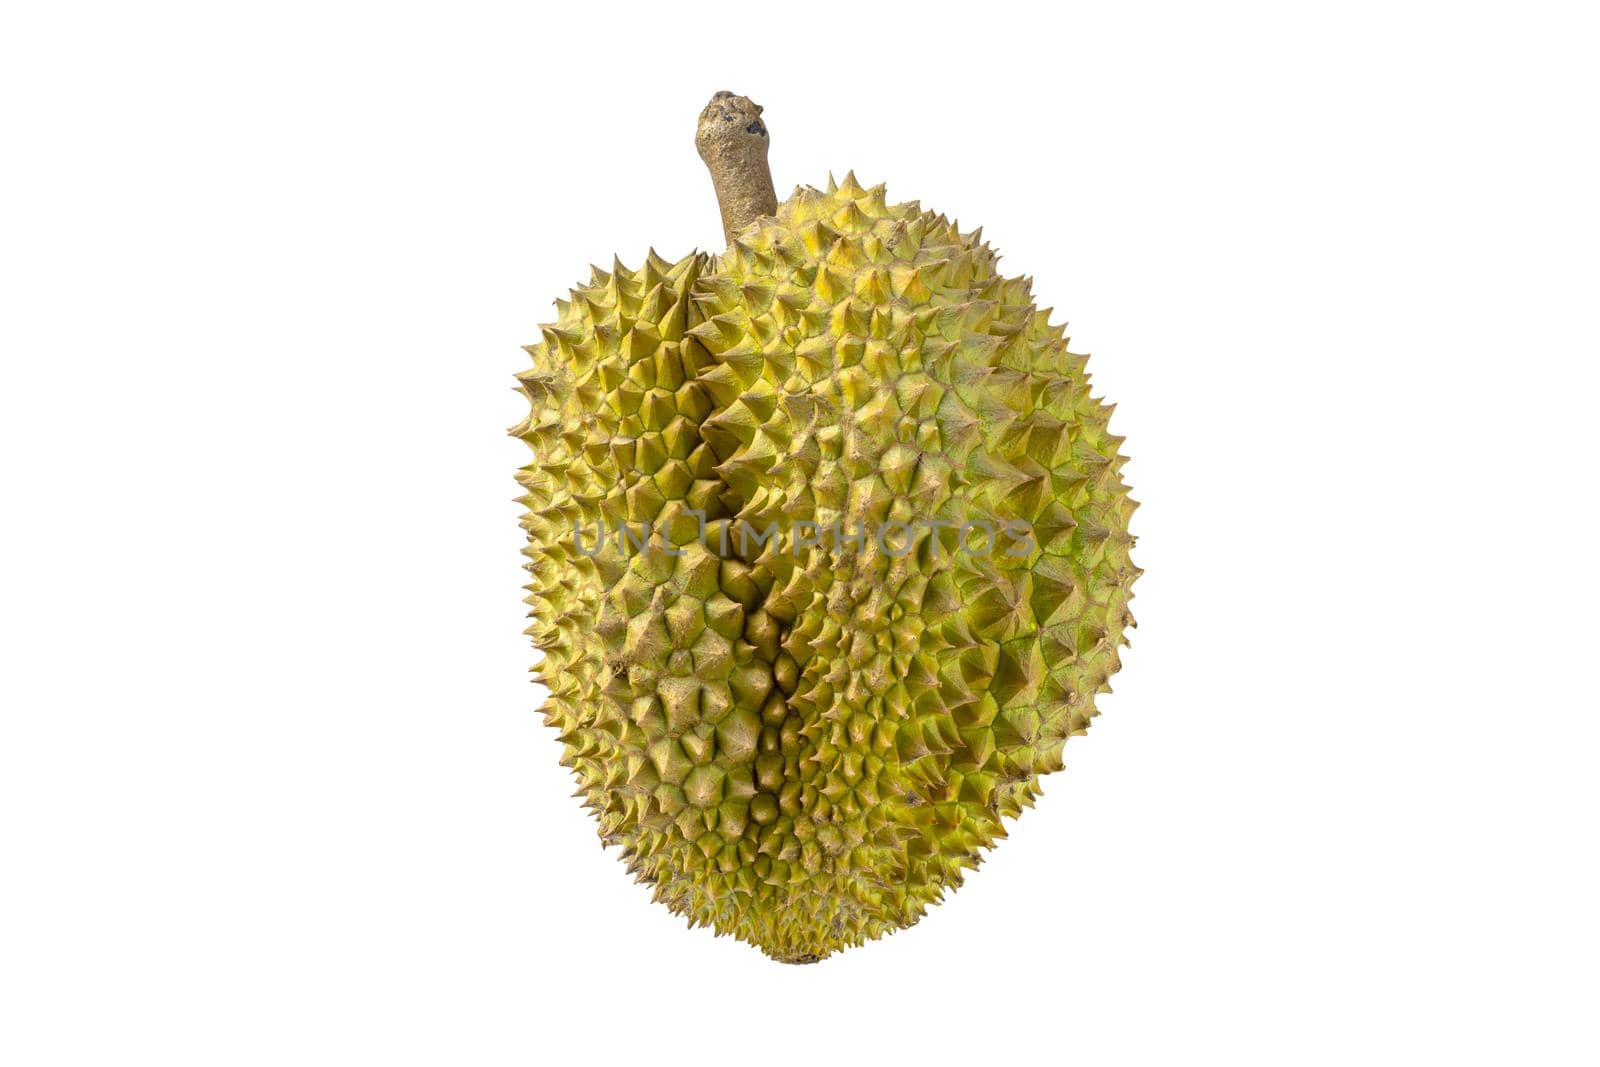 Ripe durian isolated on white background by wattanaphob